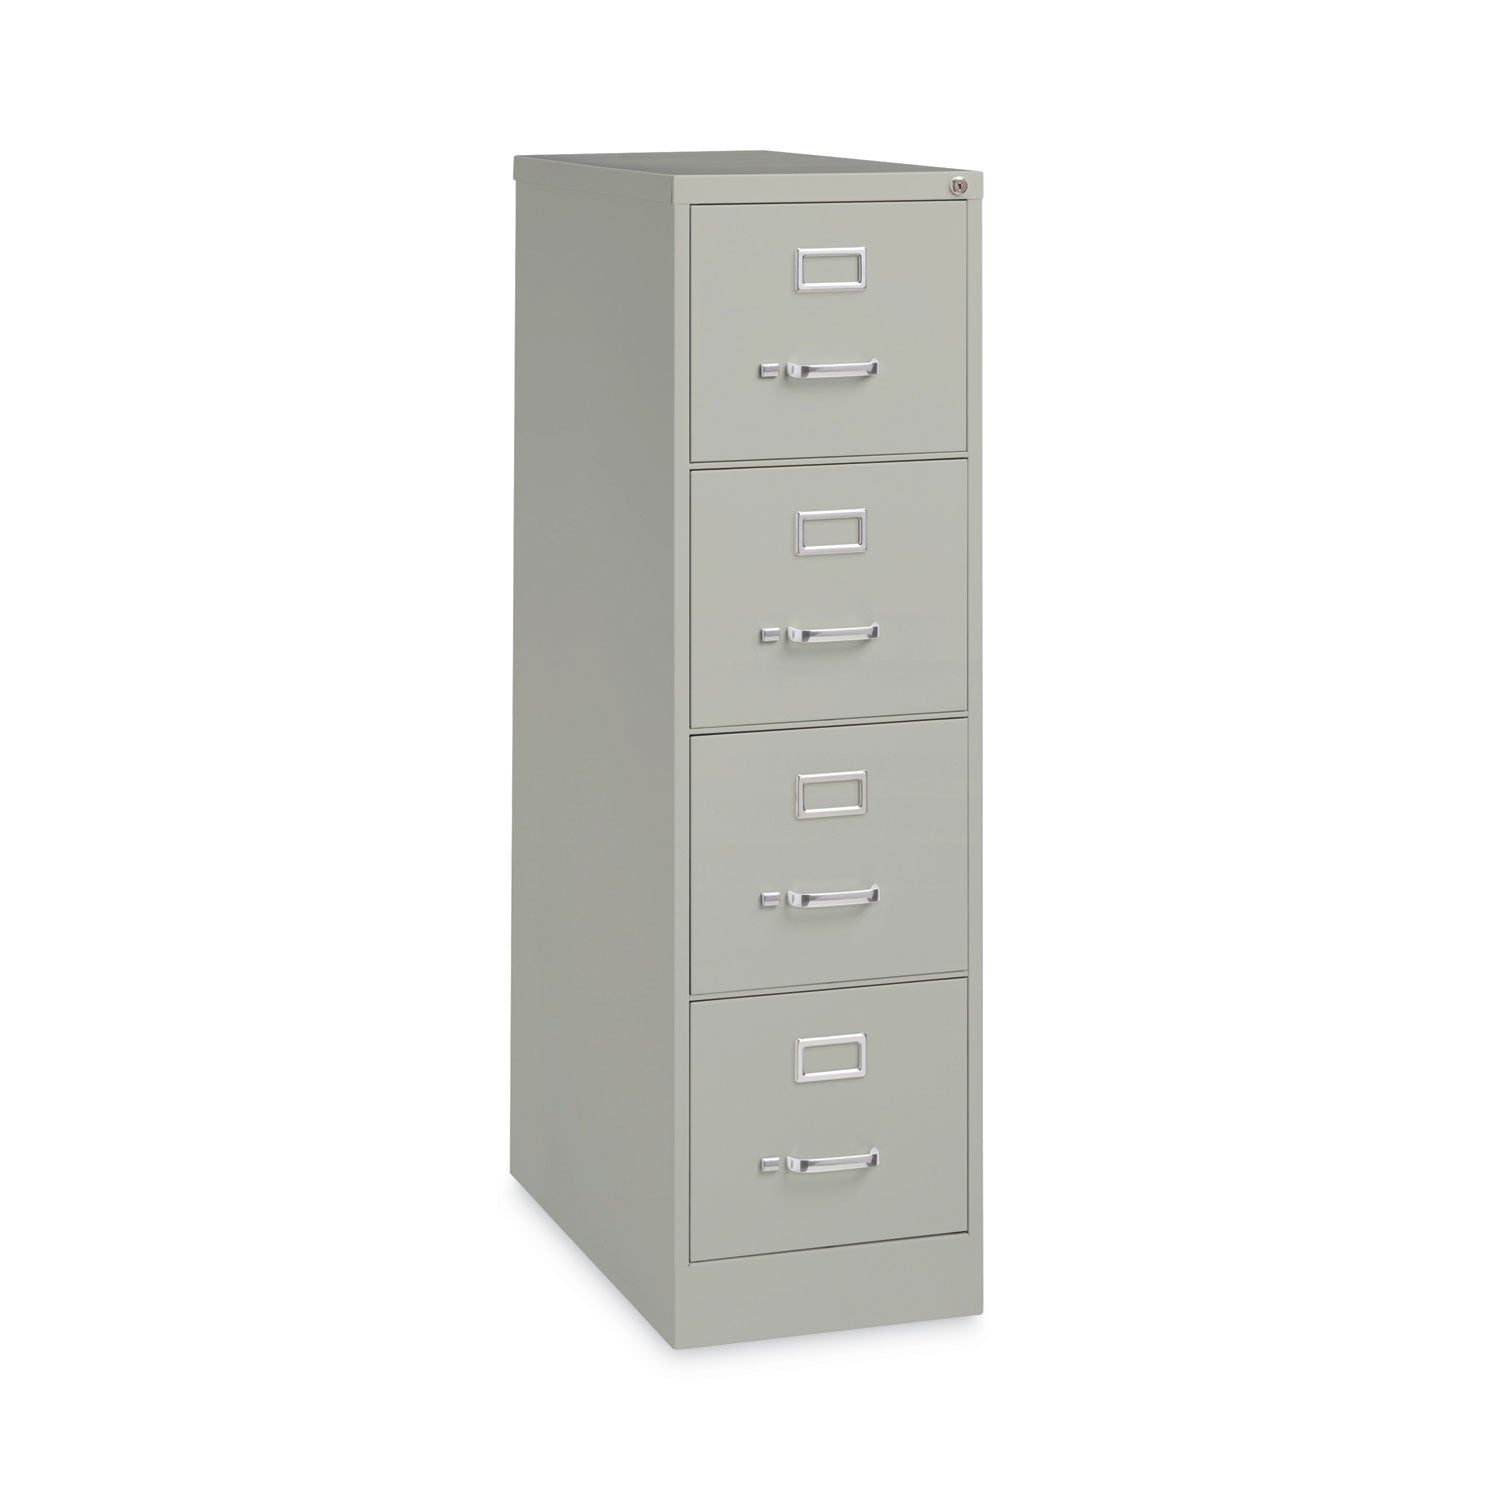 vertical-letter-file-cabinet-4-letter-size-file-drawers-light-gray-15-x-265-x-52_hid14029 - 2